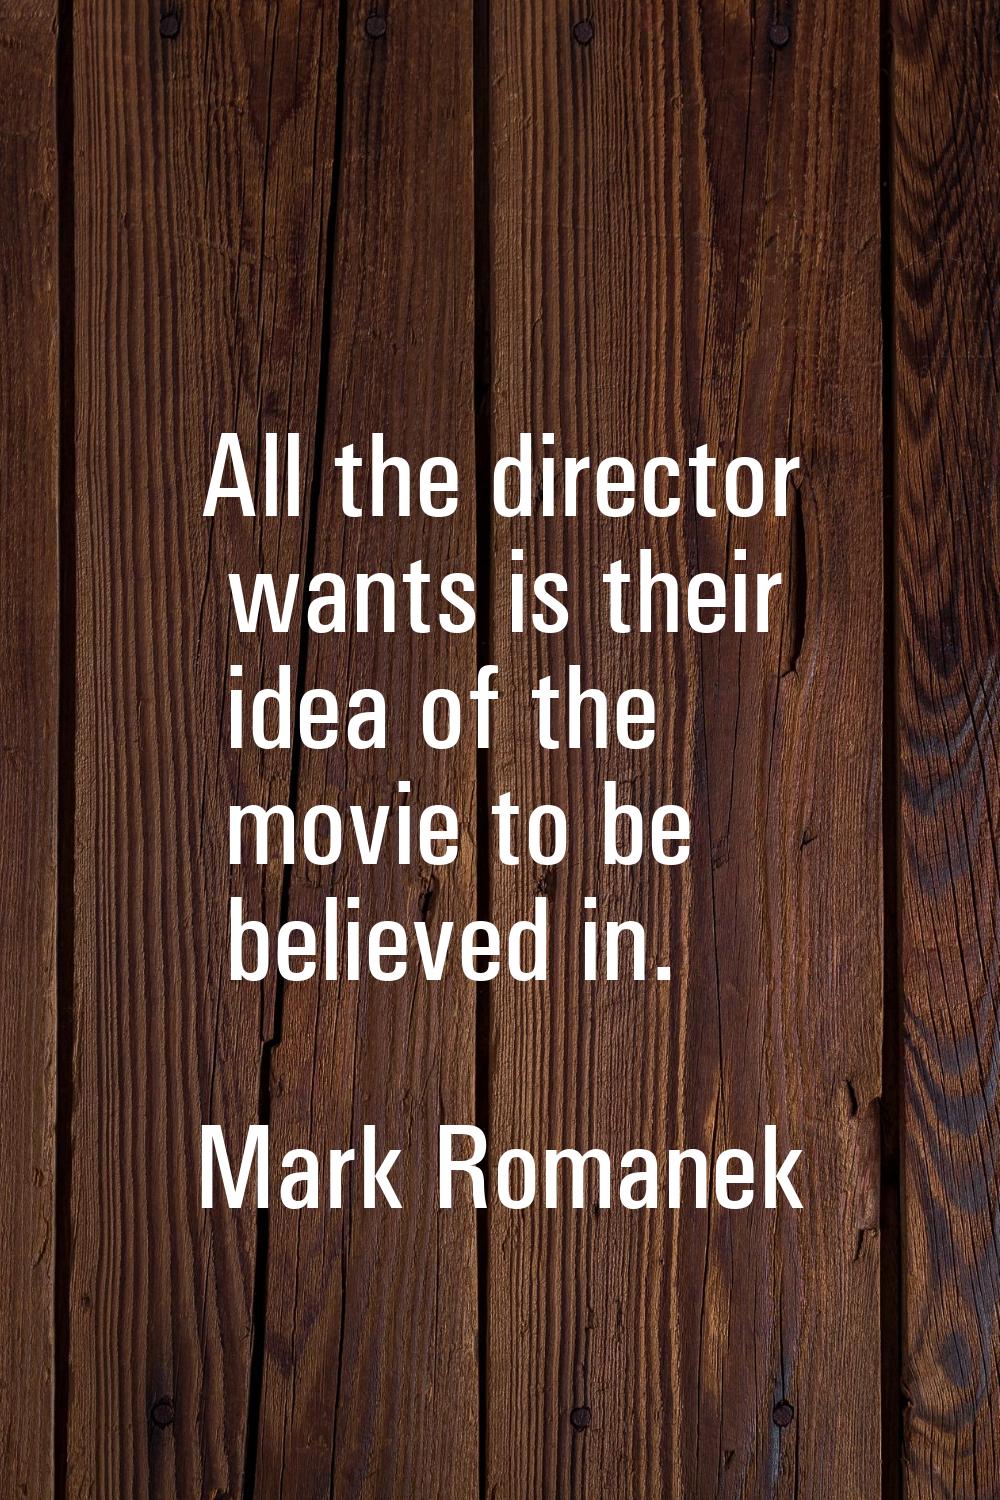 All the director wants is their idea of the movie to be believed in.